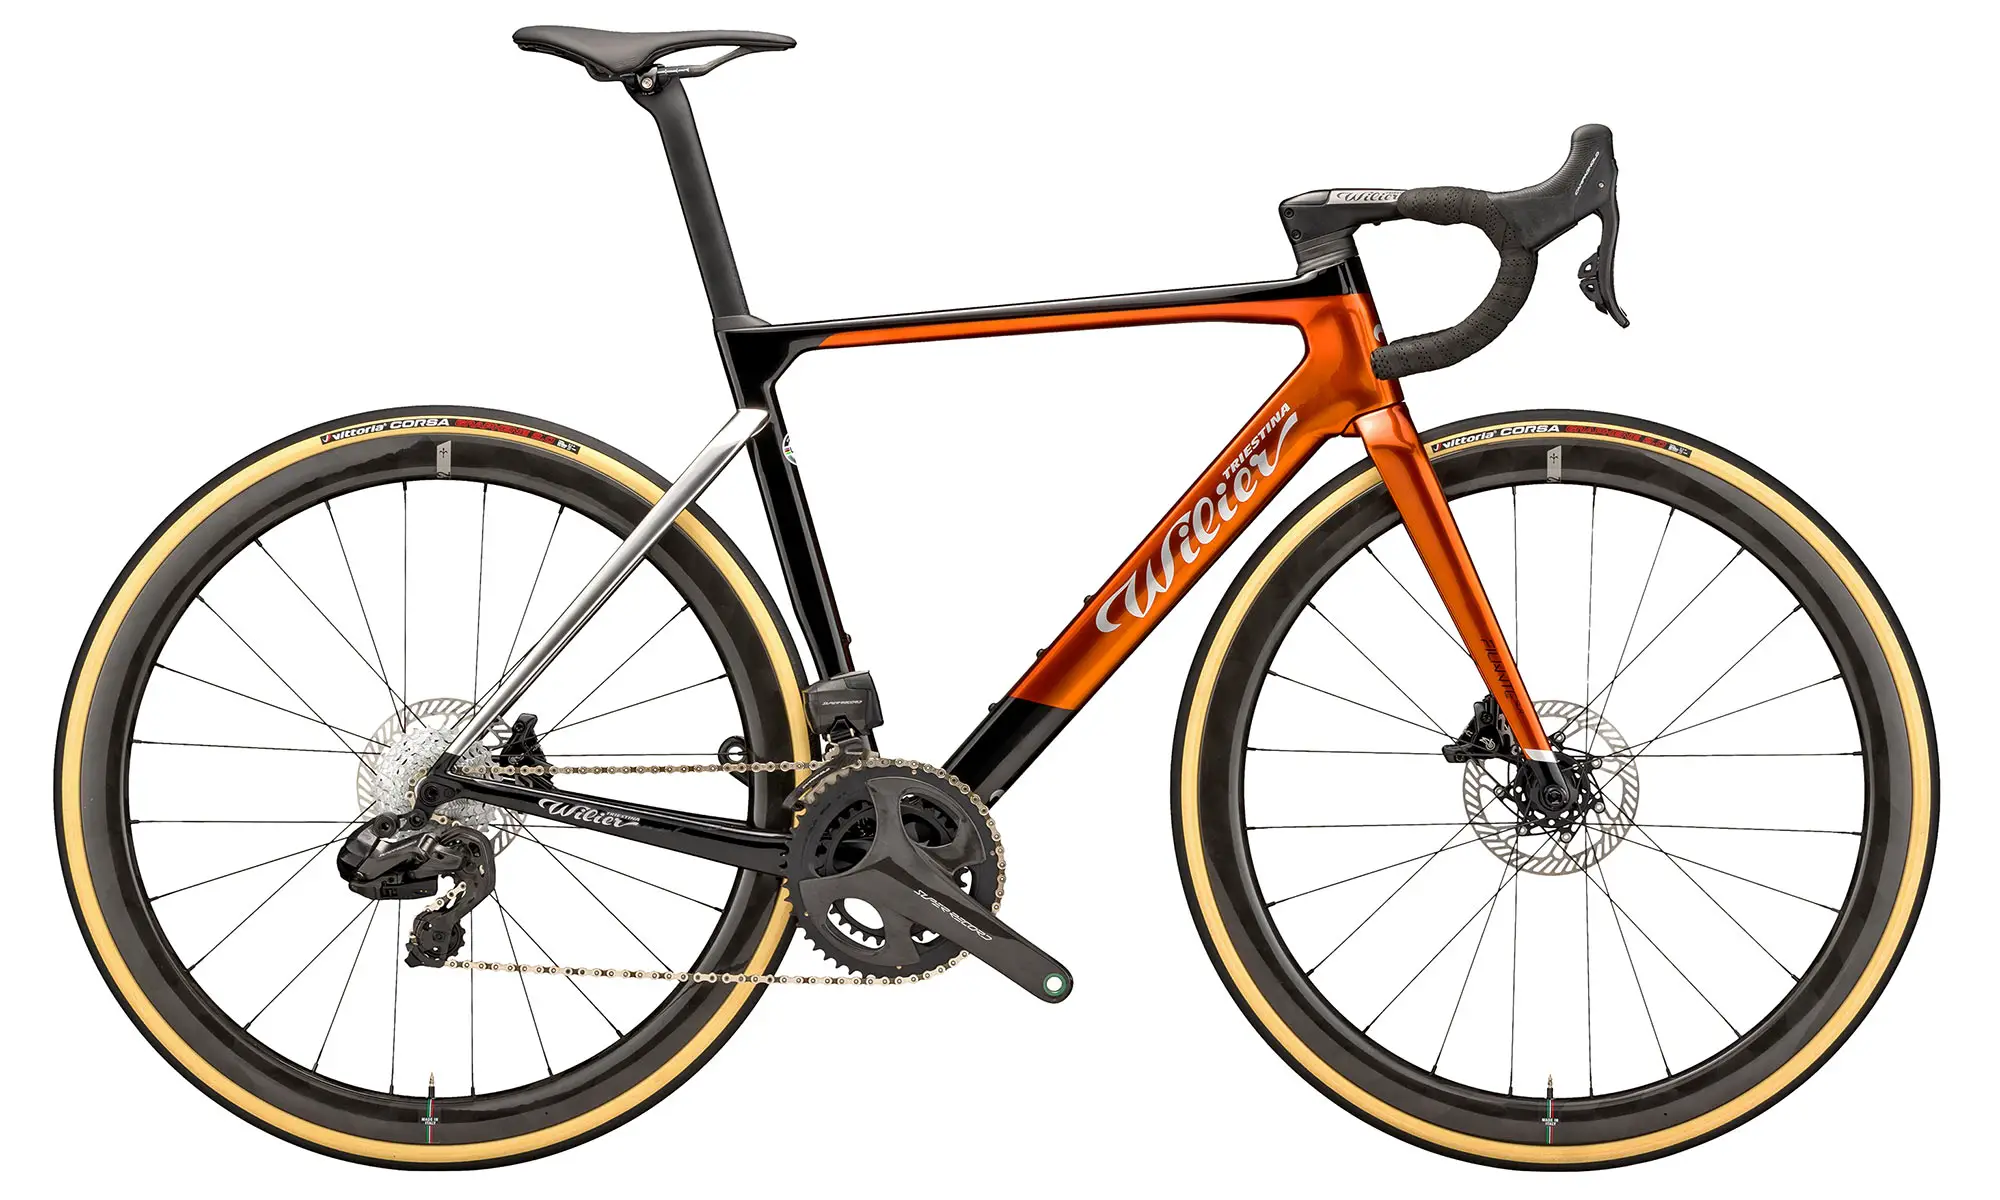 Wilier Filante SLR Ramato edition carbon aero road bike with new Campy Super Record Wireless 12sp groupset, 14,500€